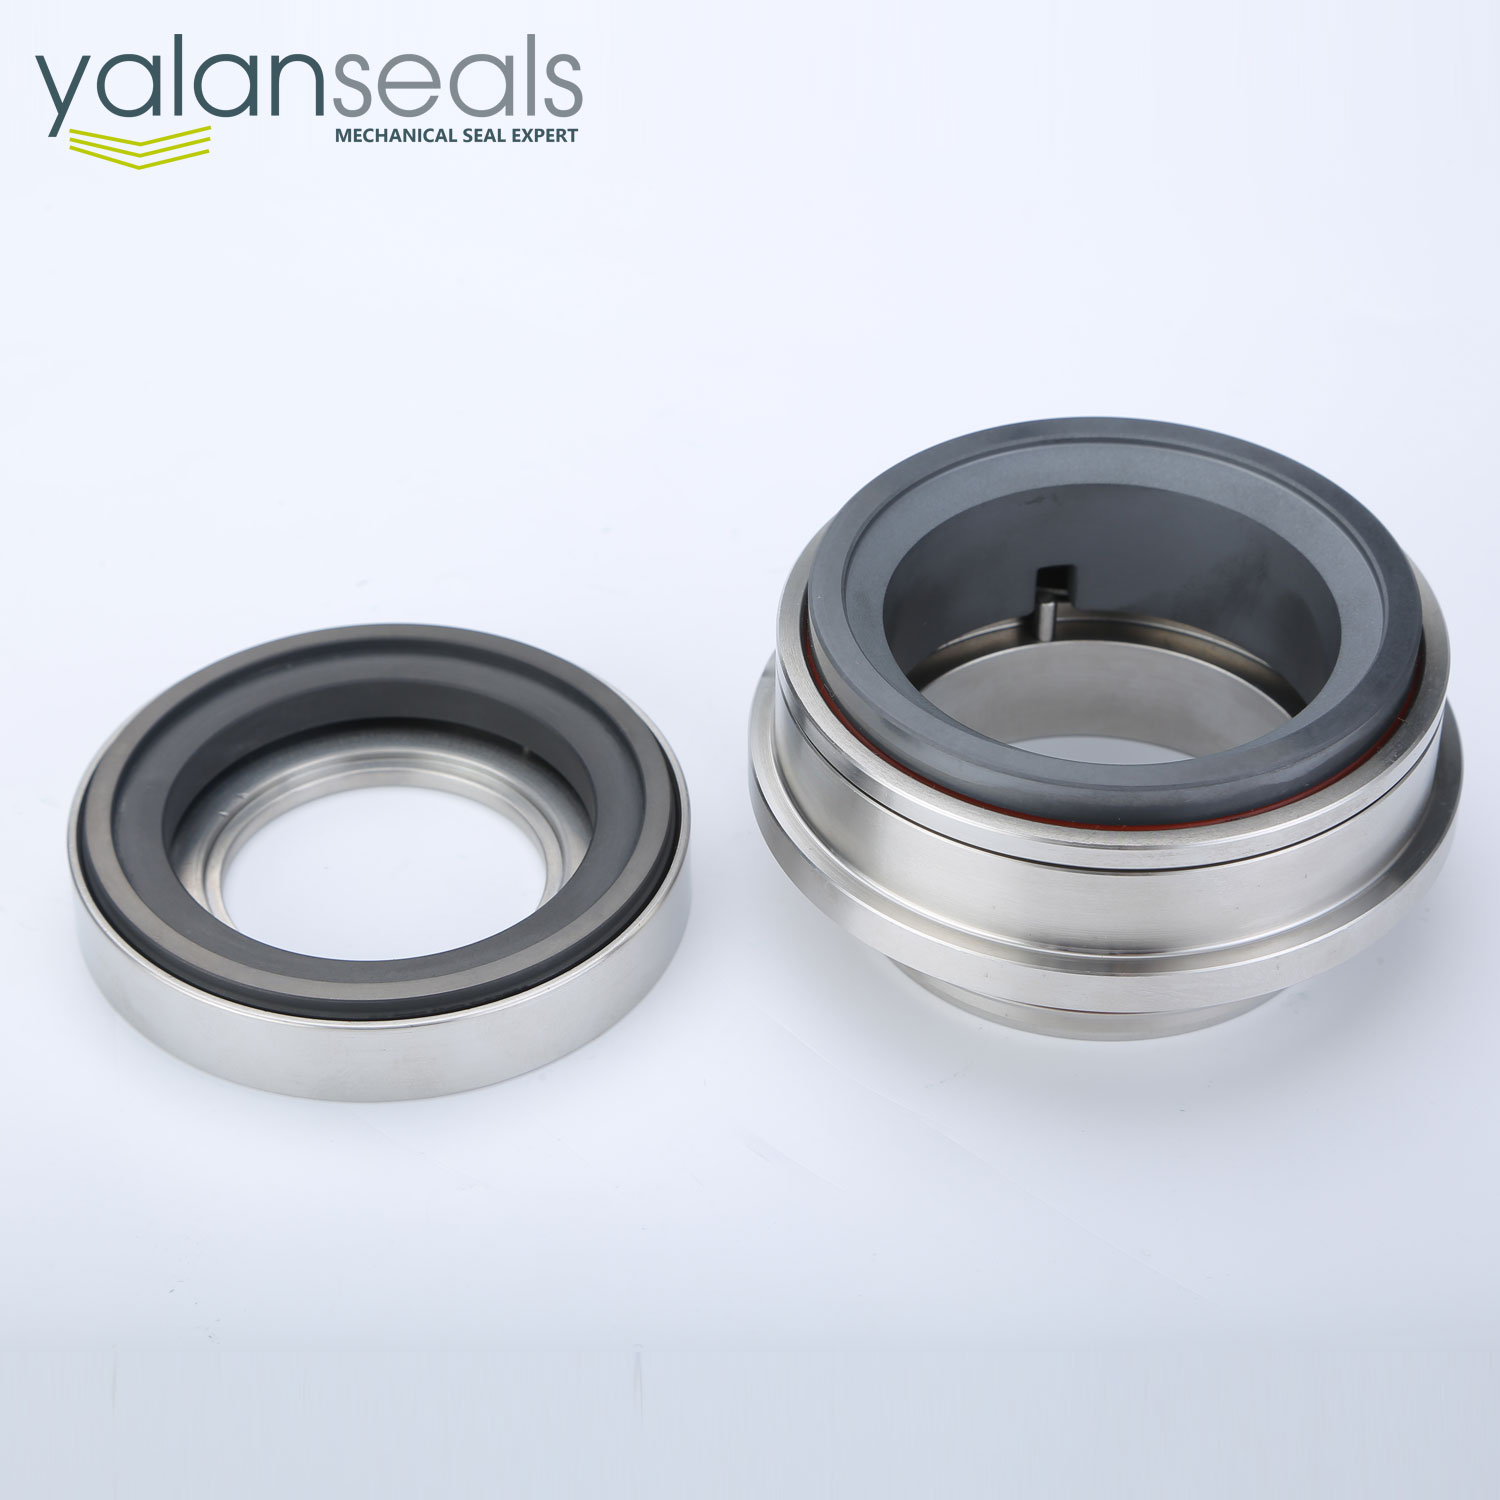 587-SP Mechanical Seals for Paper-making Equipment and other ANDRITZ Industrial Pumps